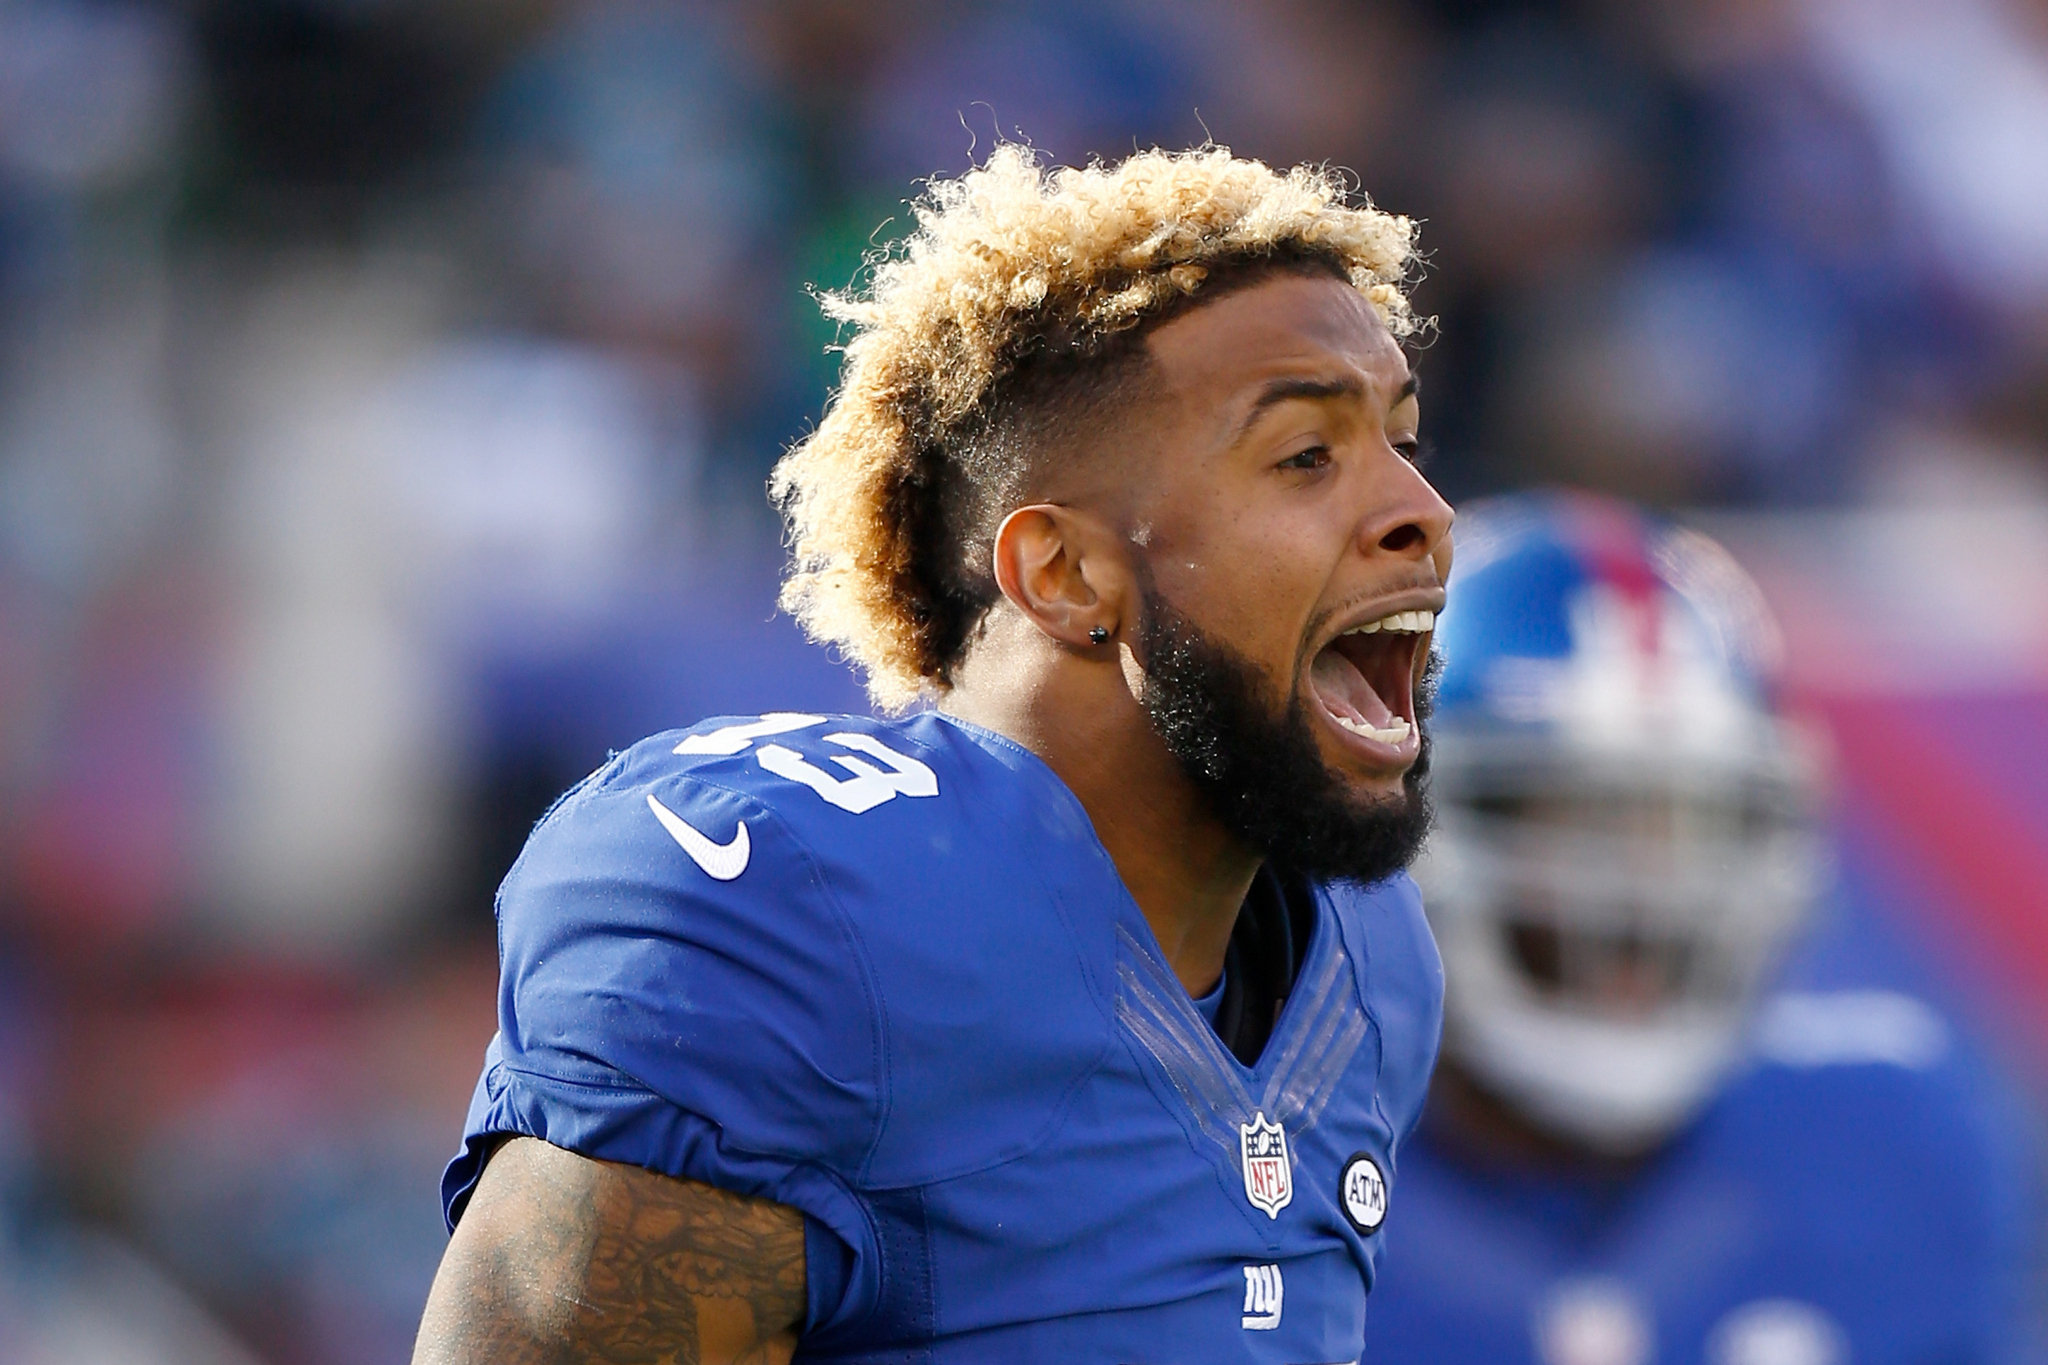 HD desktop wallpaper featuring a New York Giants player in a blue jersey mid-shout on the field.